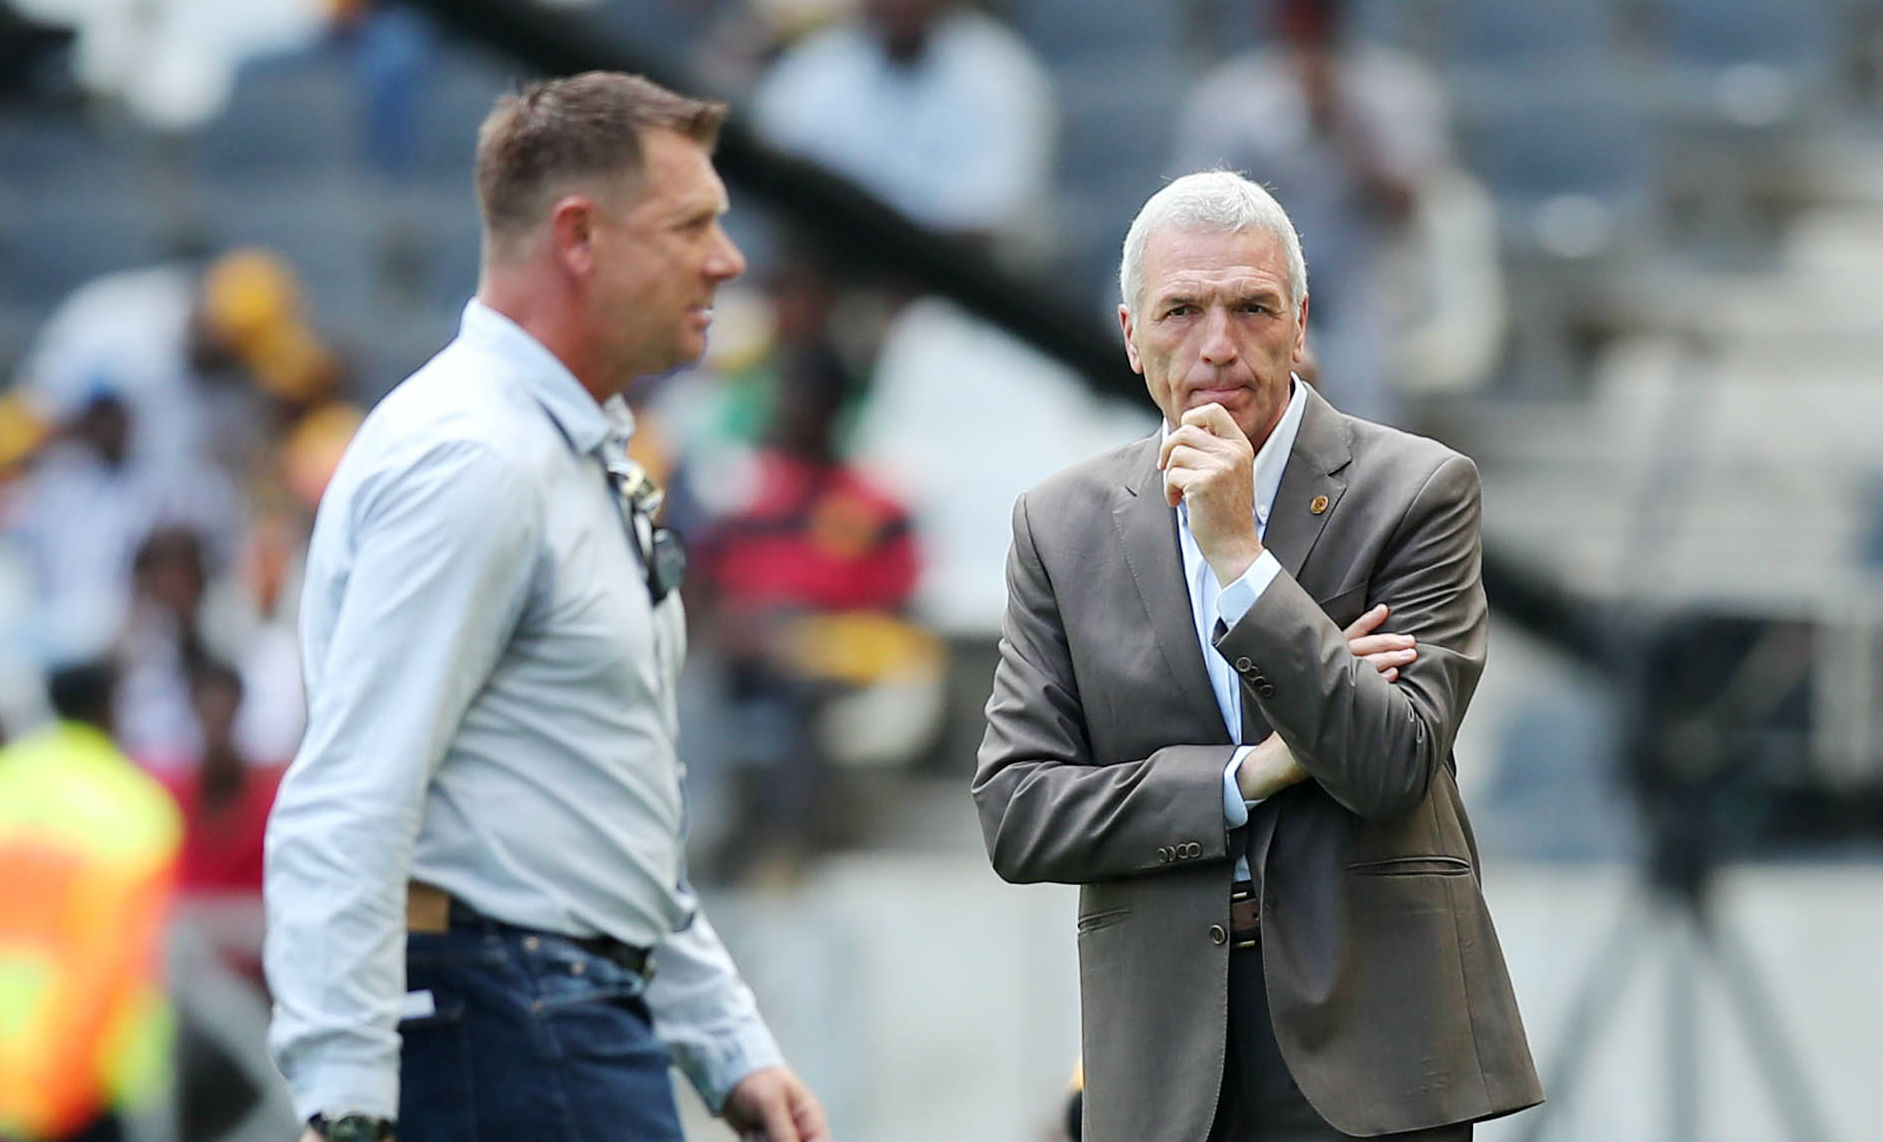 Telkom Knockout Cup: Former Orlando Pirates coach Tinkler takes dig at Kaizer Chiefs